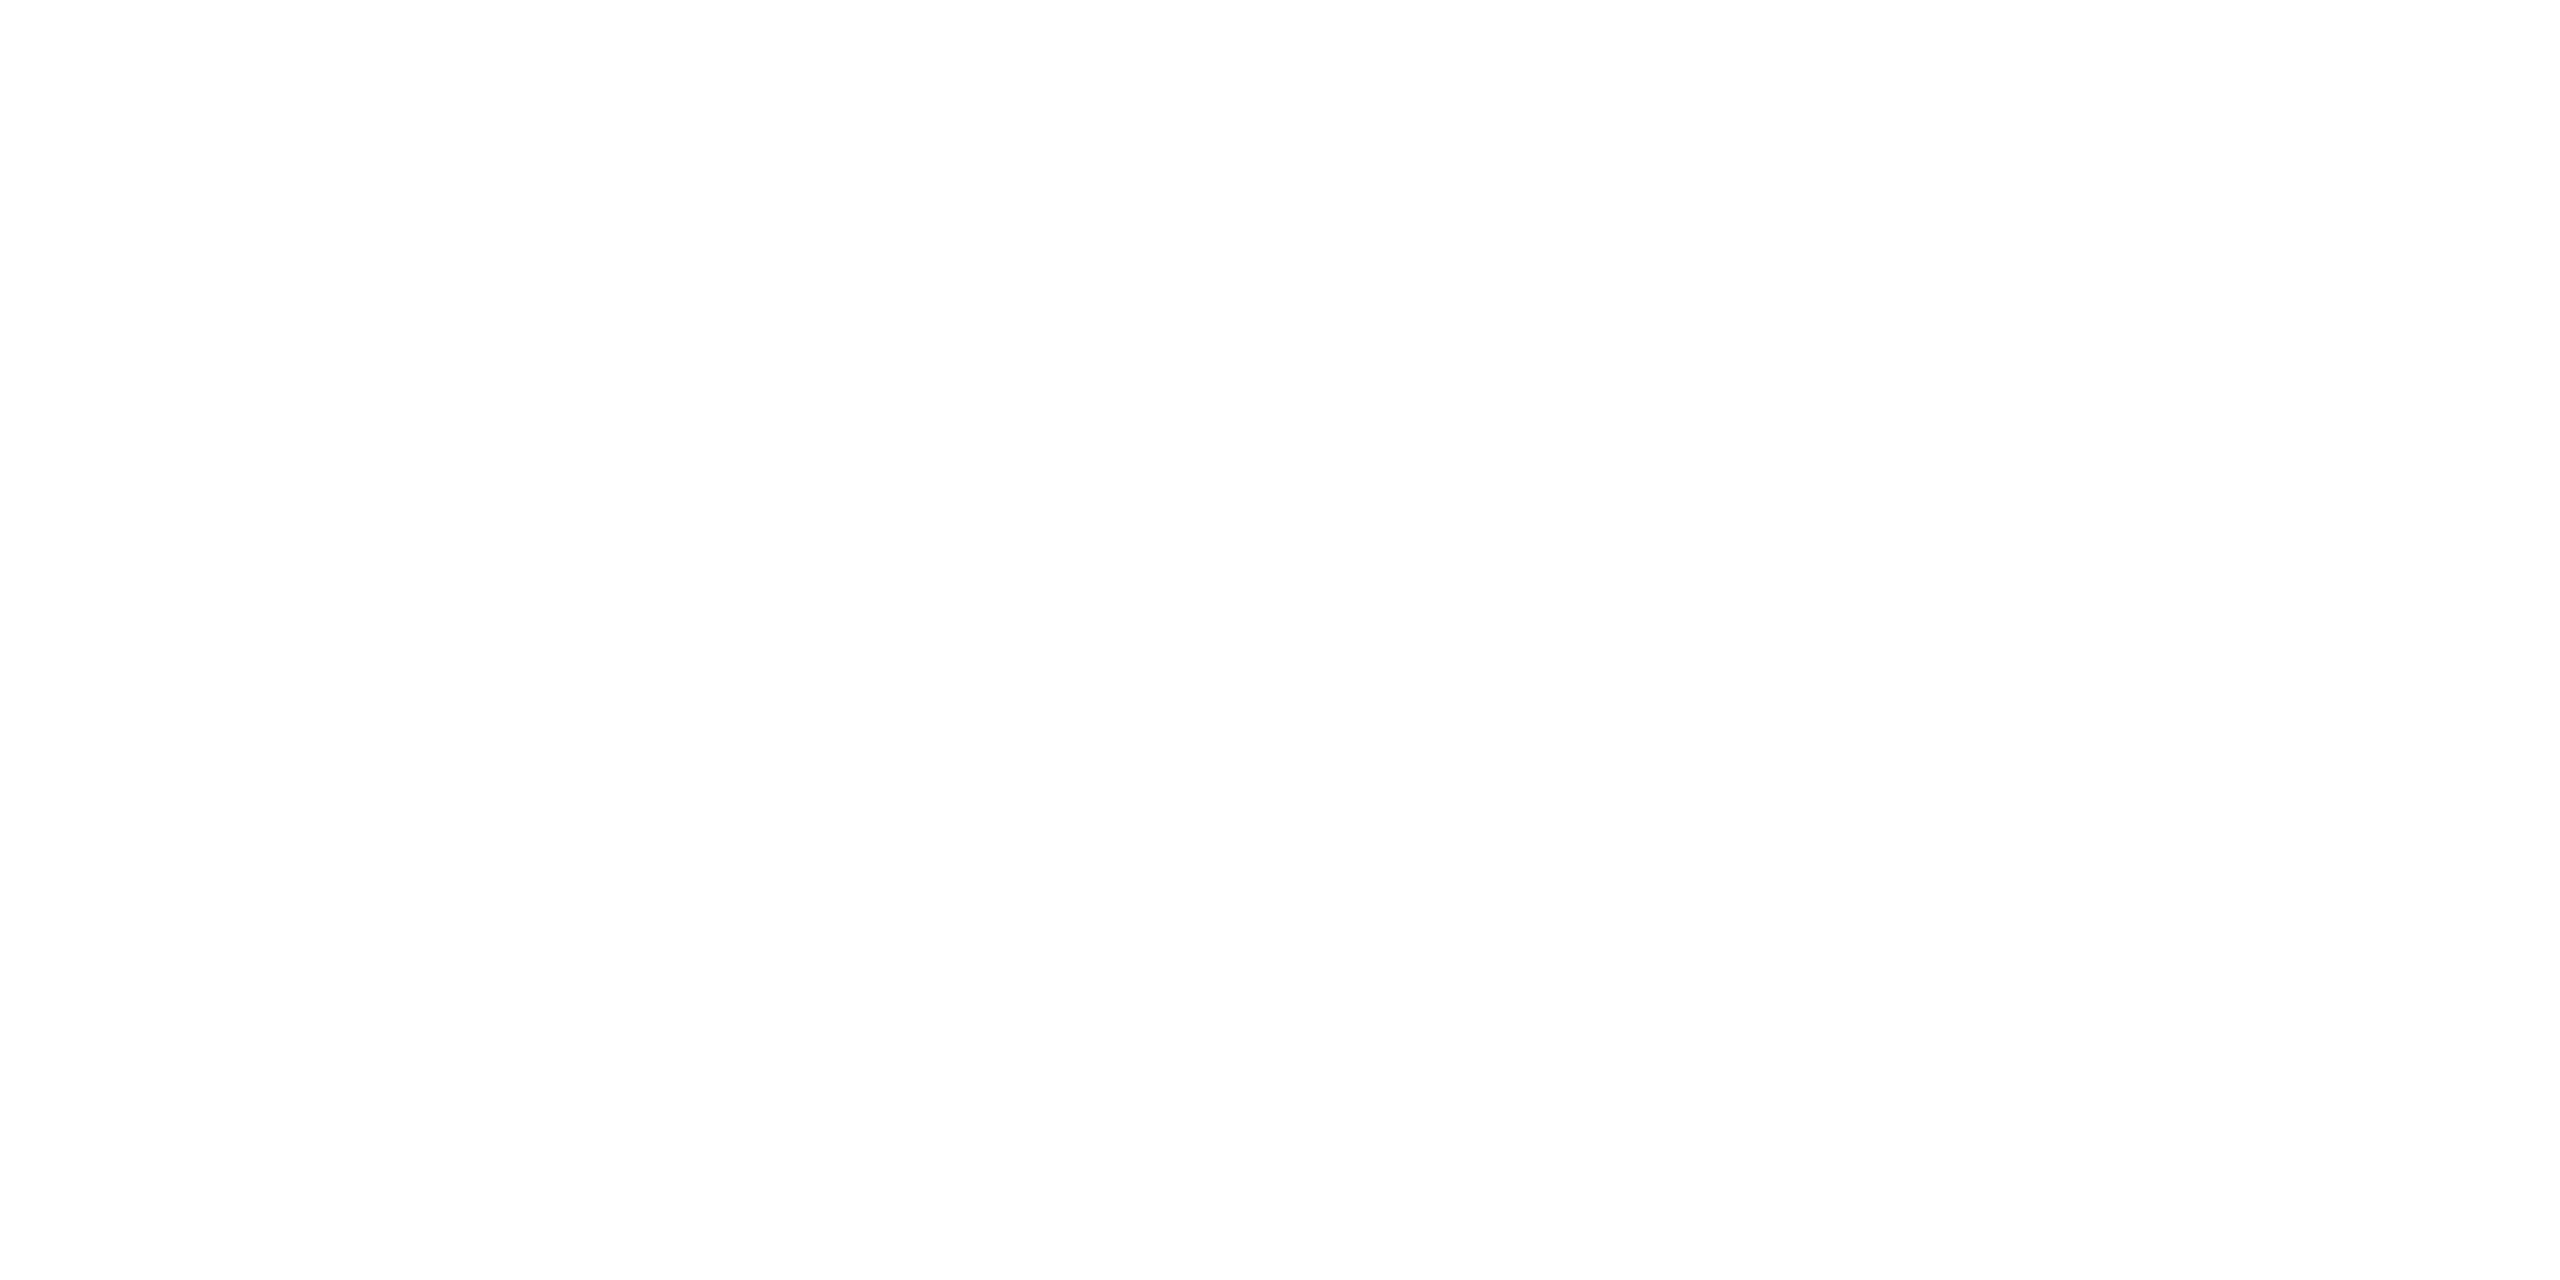 Silhouette of a maid pushing a broom - True Cleaning Experts Logo